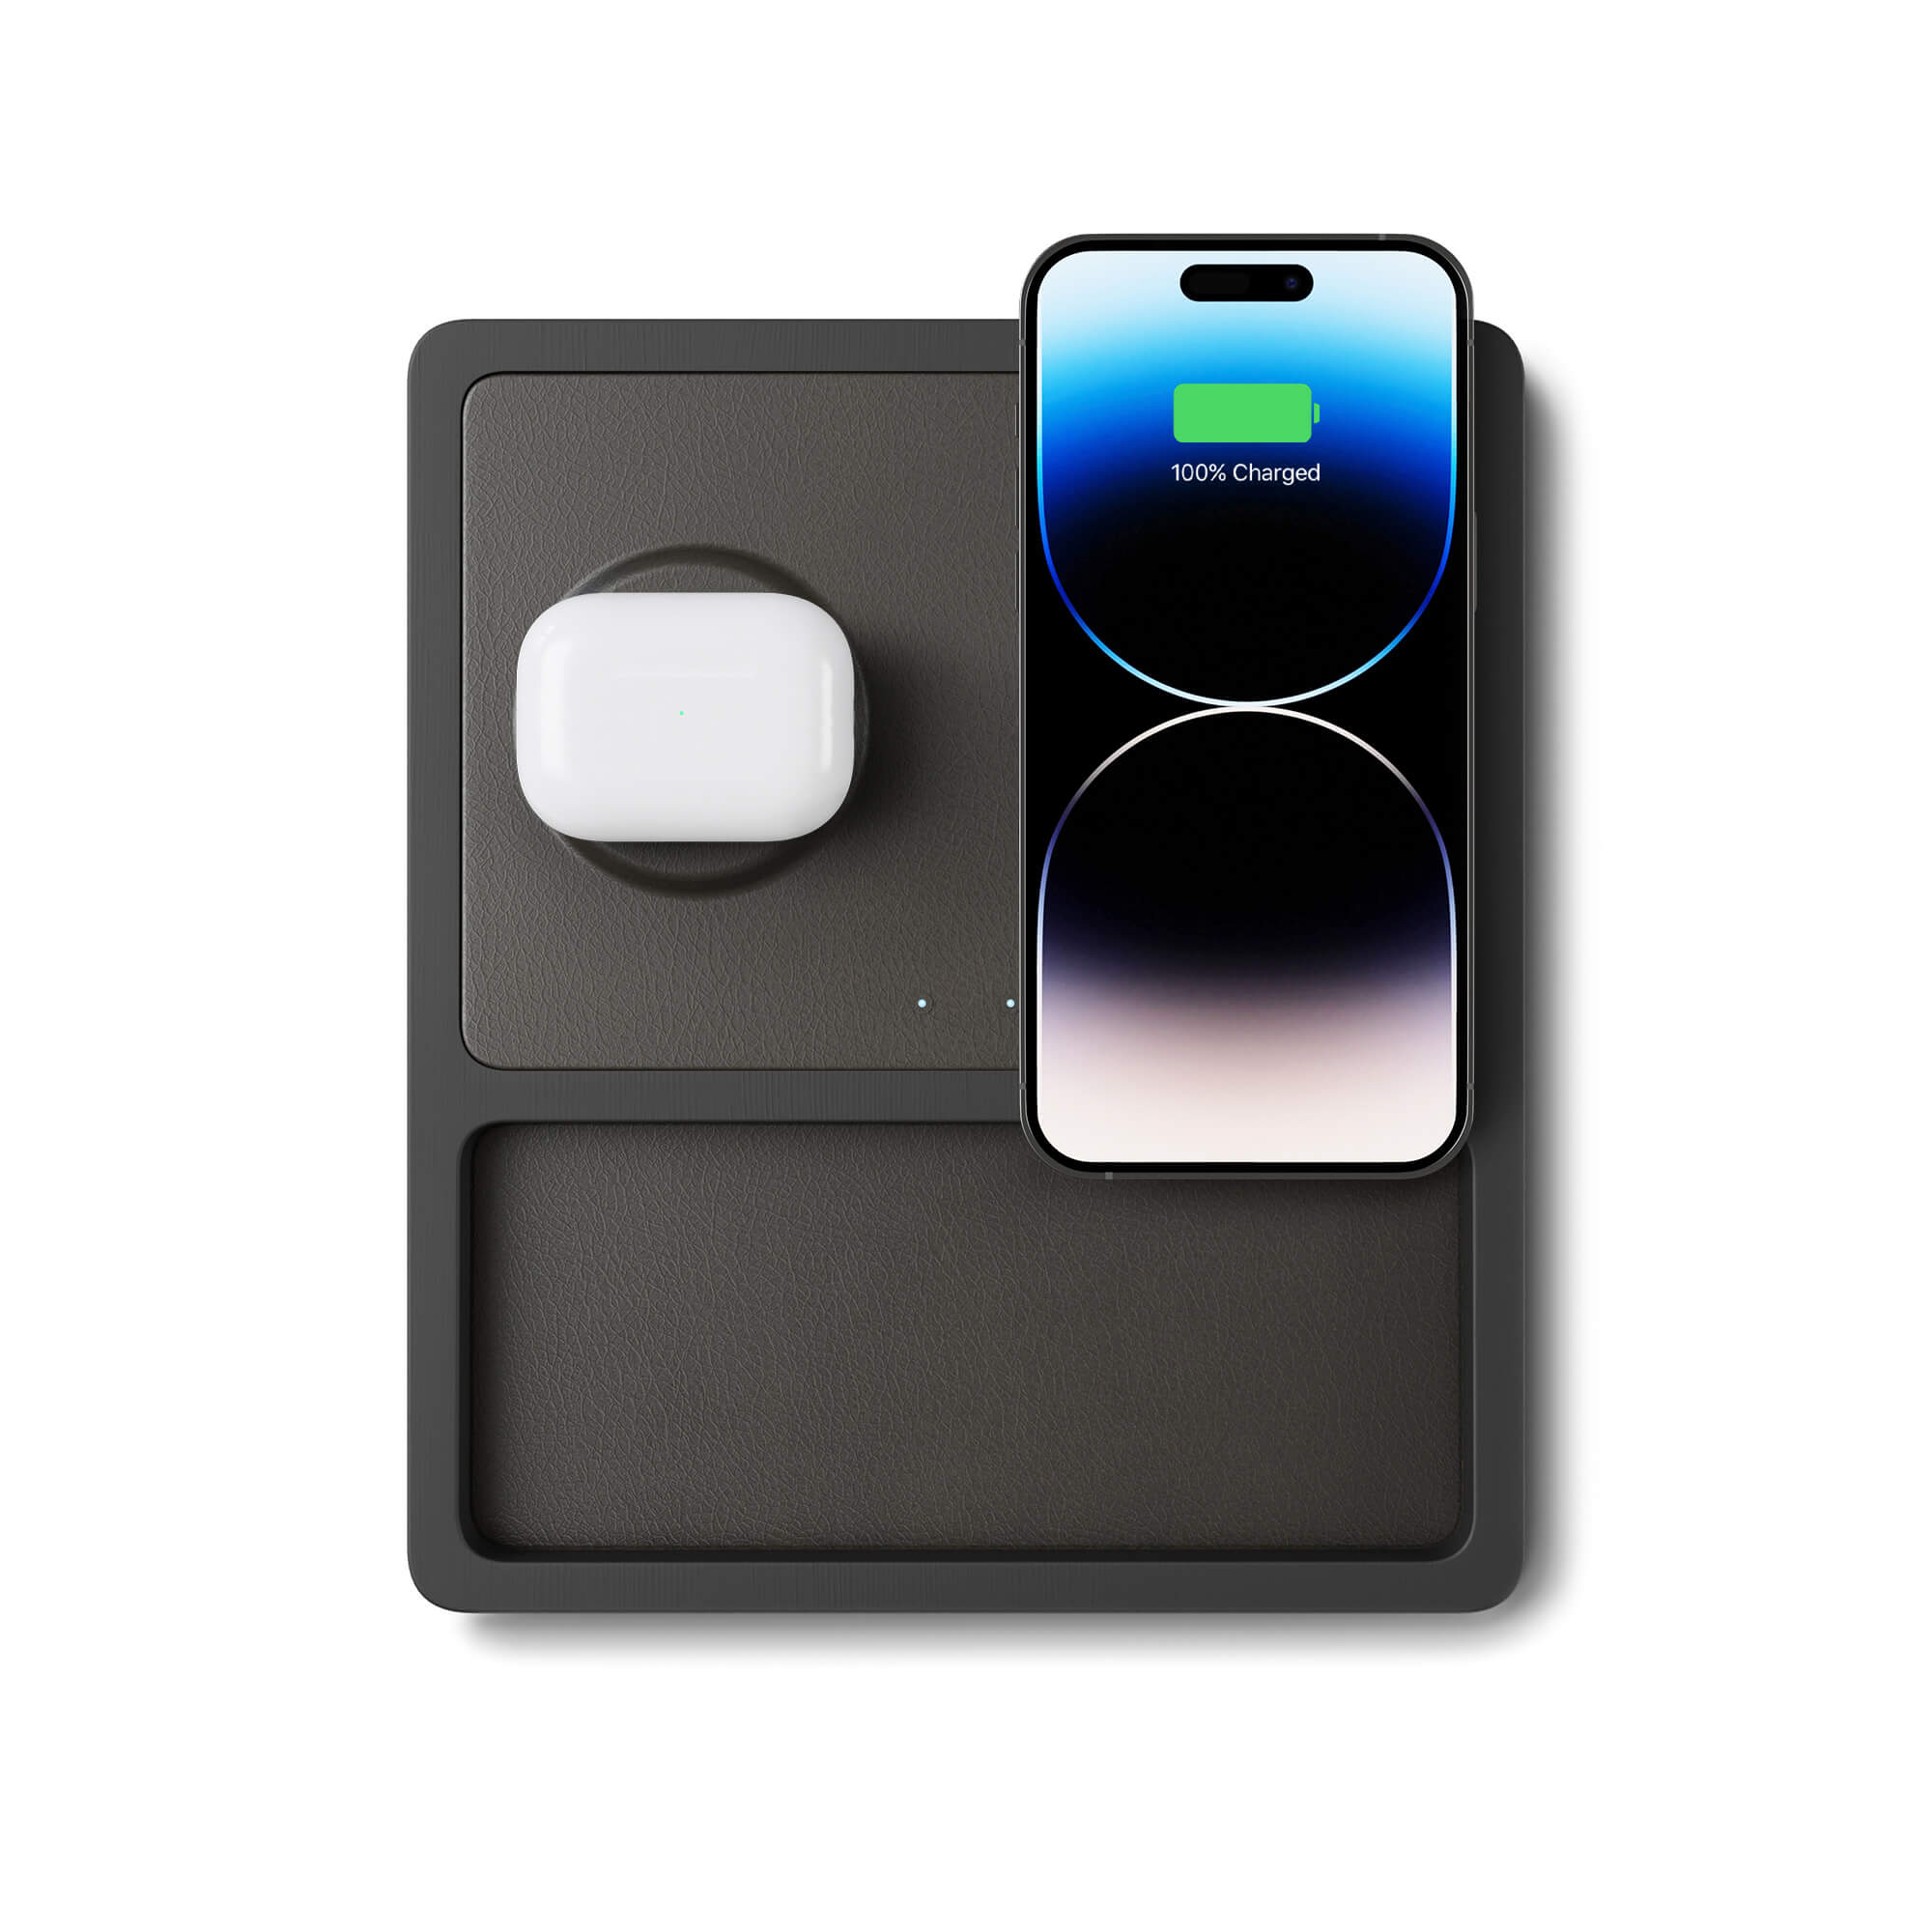 DUO TRAY Black - 2-in-1 MagSafe Midnight Black Wireless Charger with USB-C and A Ports Support